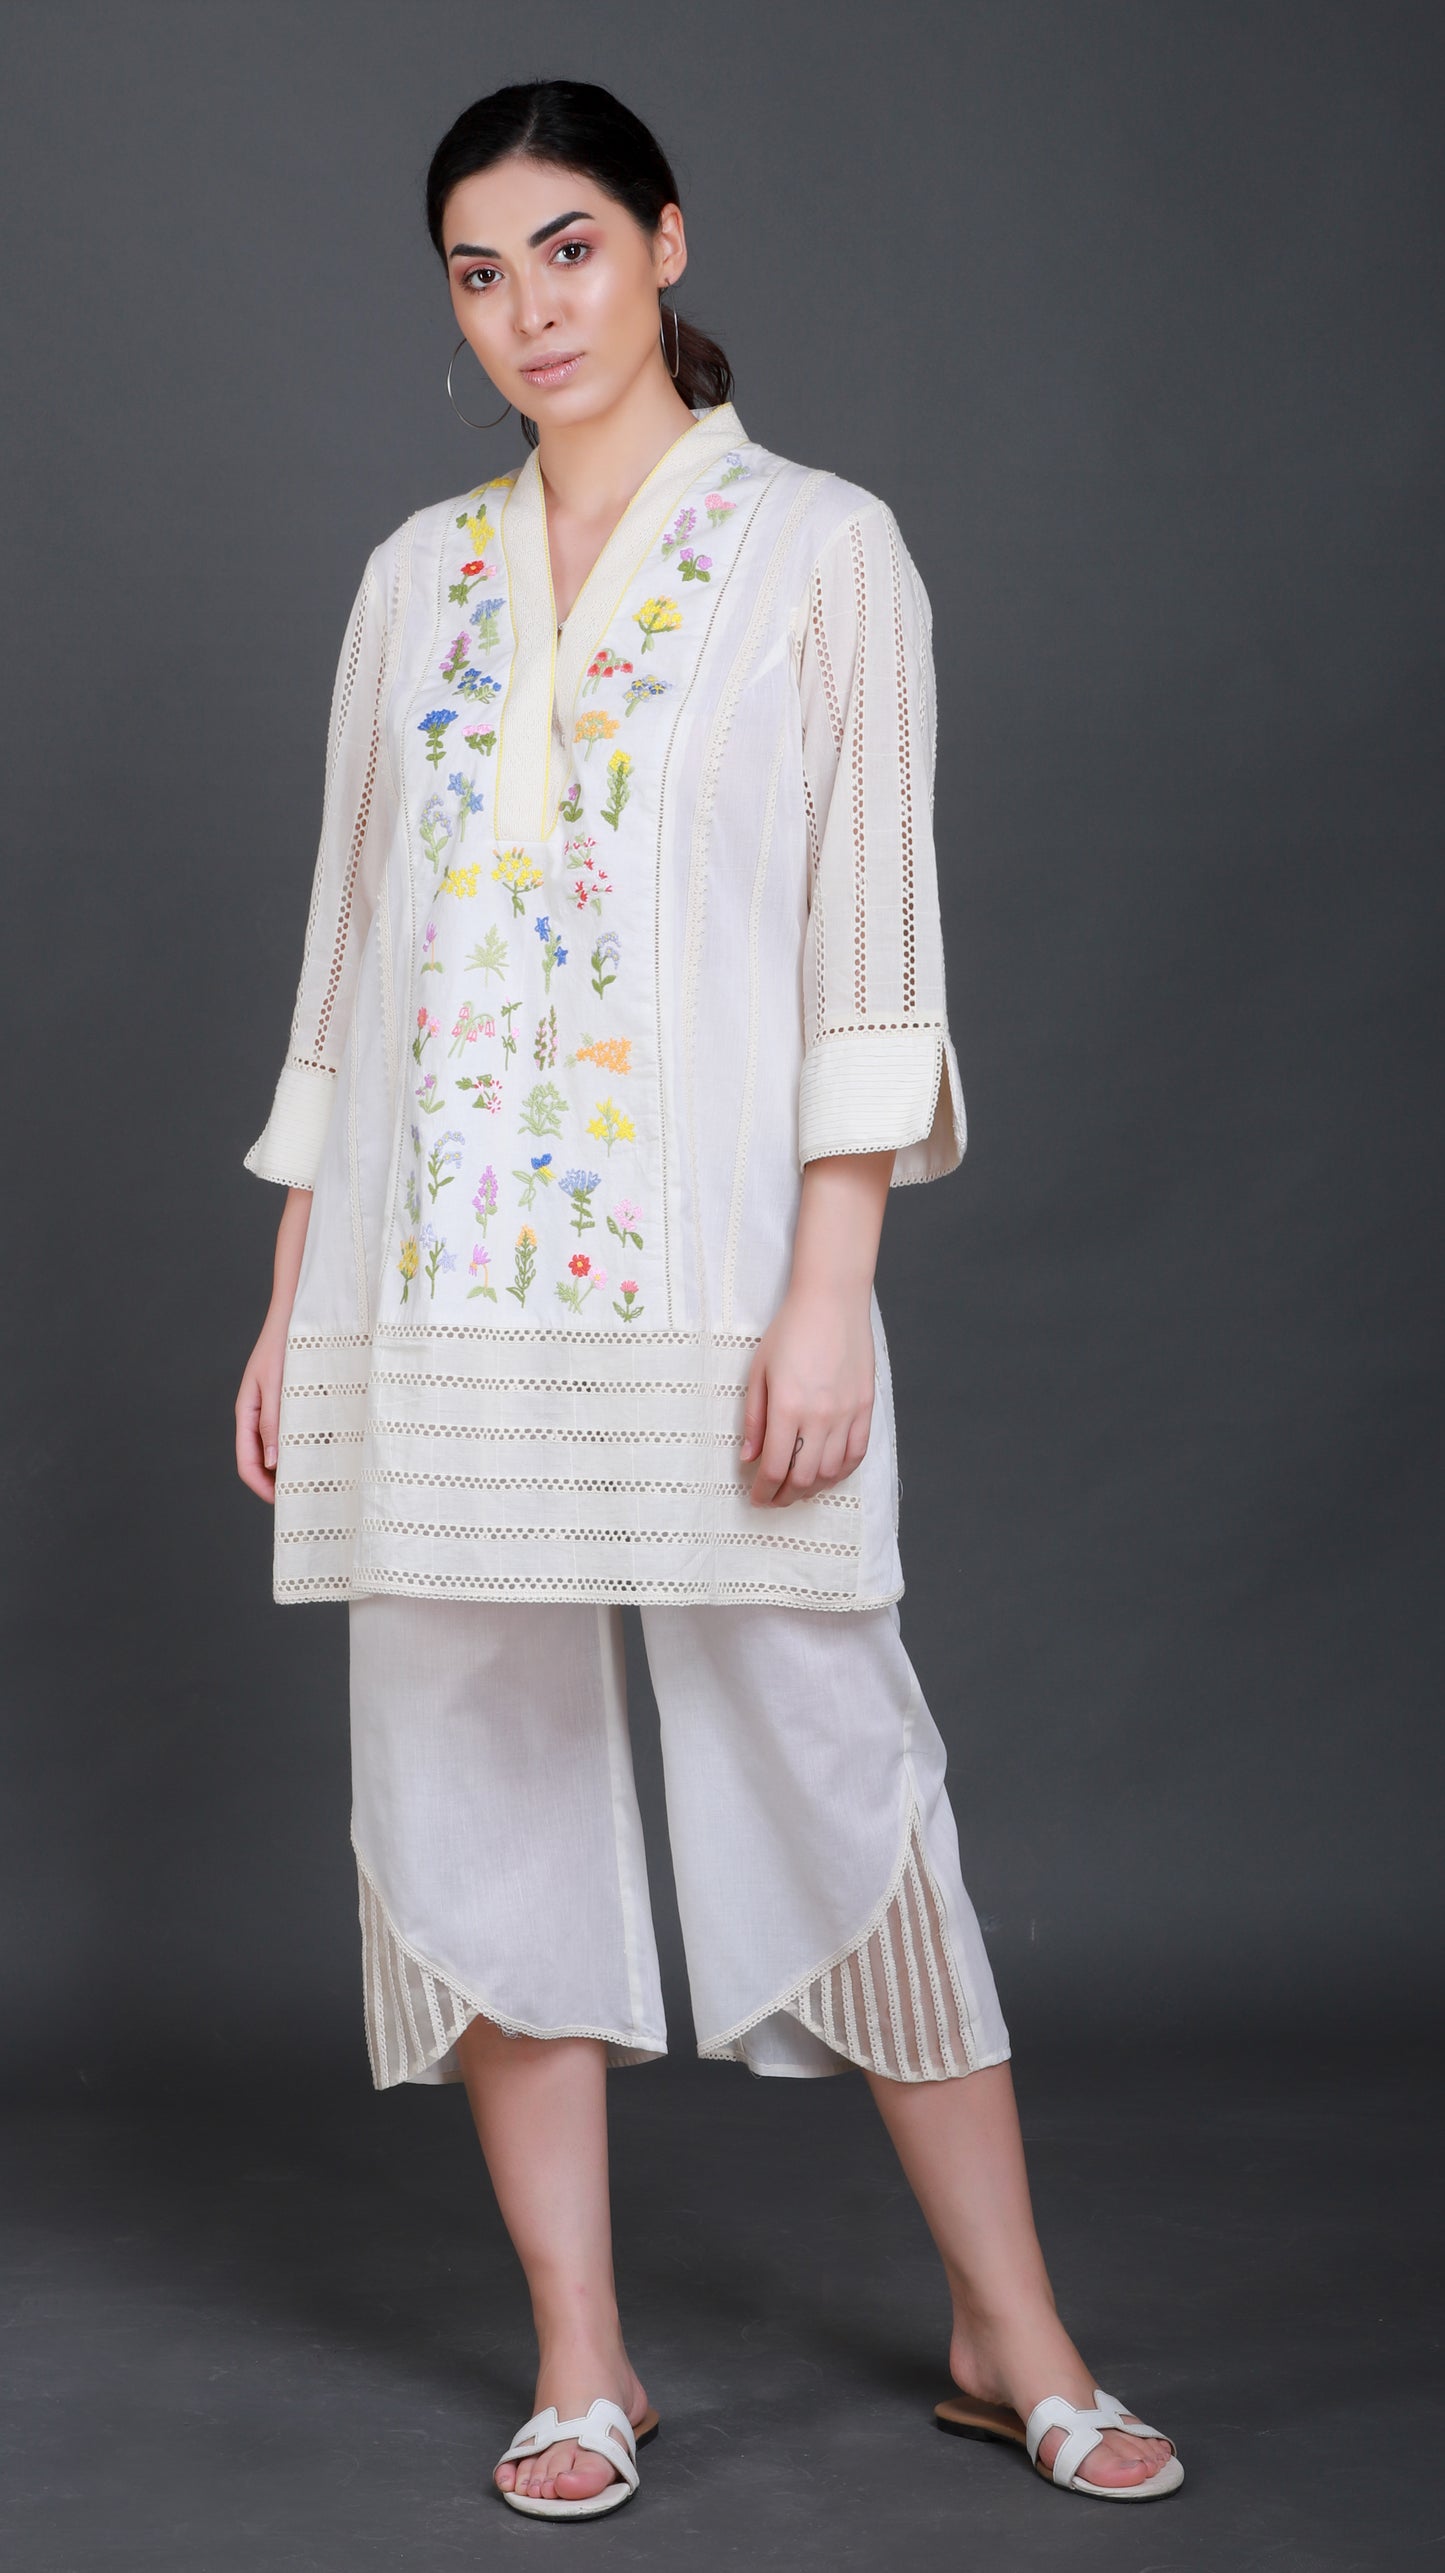 Botanical Embroidered Front Panel with Crochet inlet Sleeves